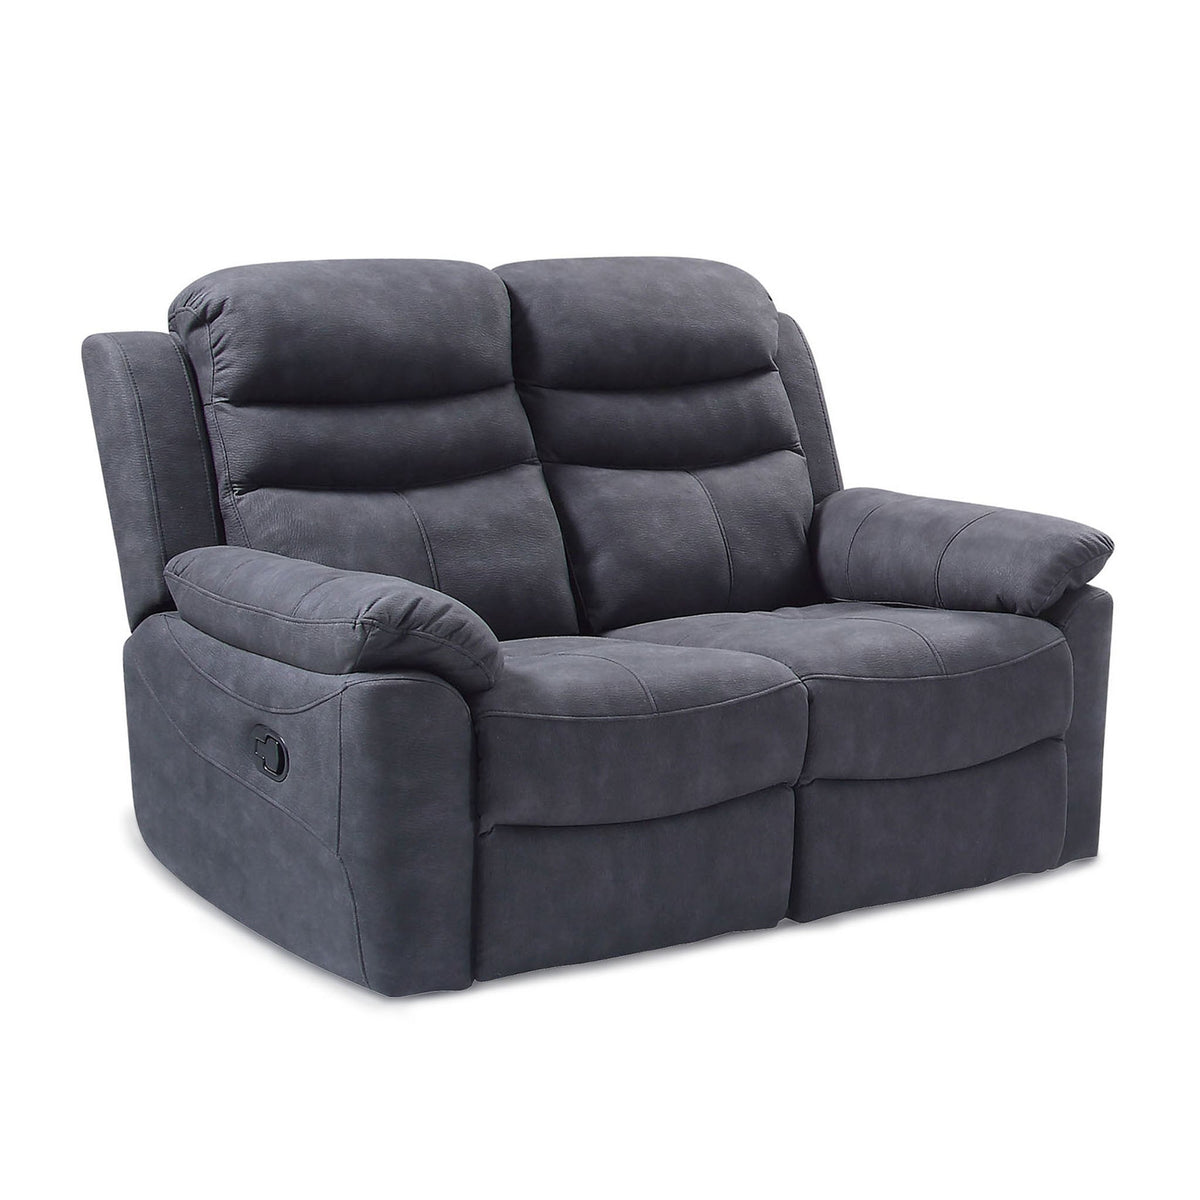 Conway Reclining 2 Seater Sofa